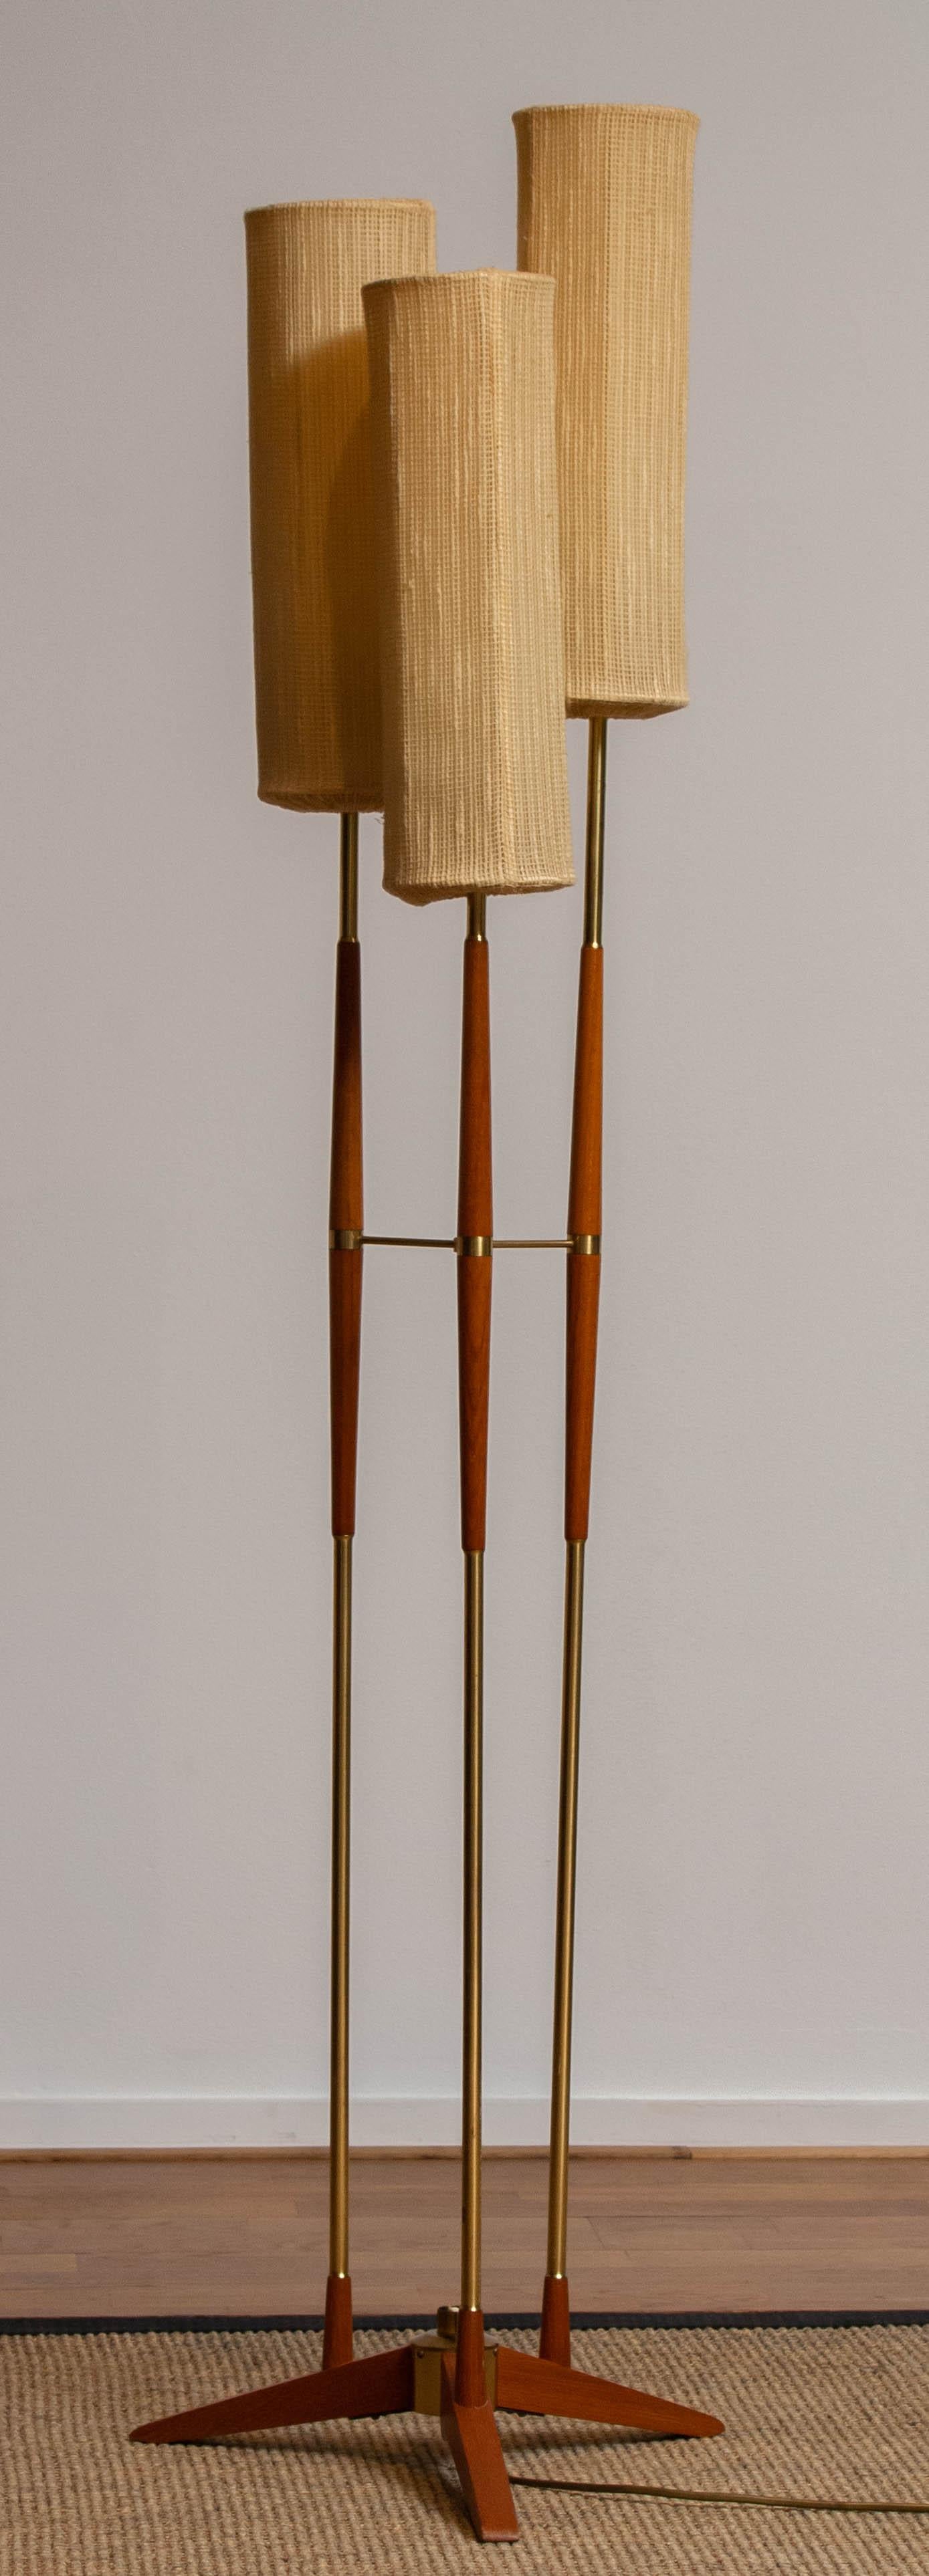 Beautiful floor lamp made by Möllers Armaturer Eskilstuna from Sweden.
This lamp is made of teak and brass and has three shades hiding three fittings, size E27 / E28 and ready to use for 110 as awel 230 volts.
It is in a very nice working